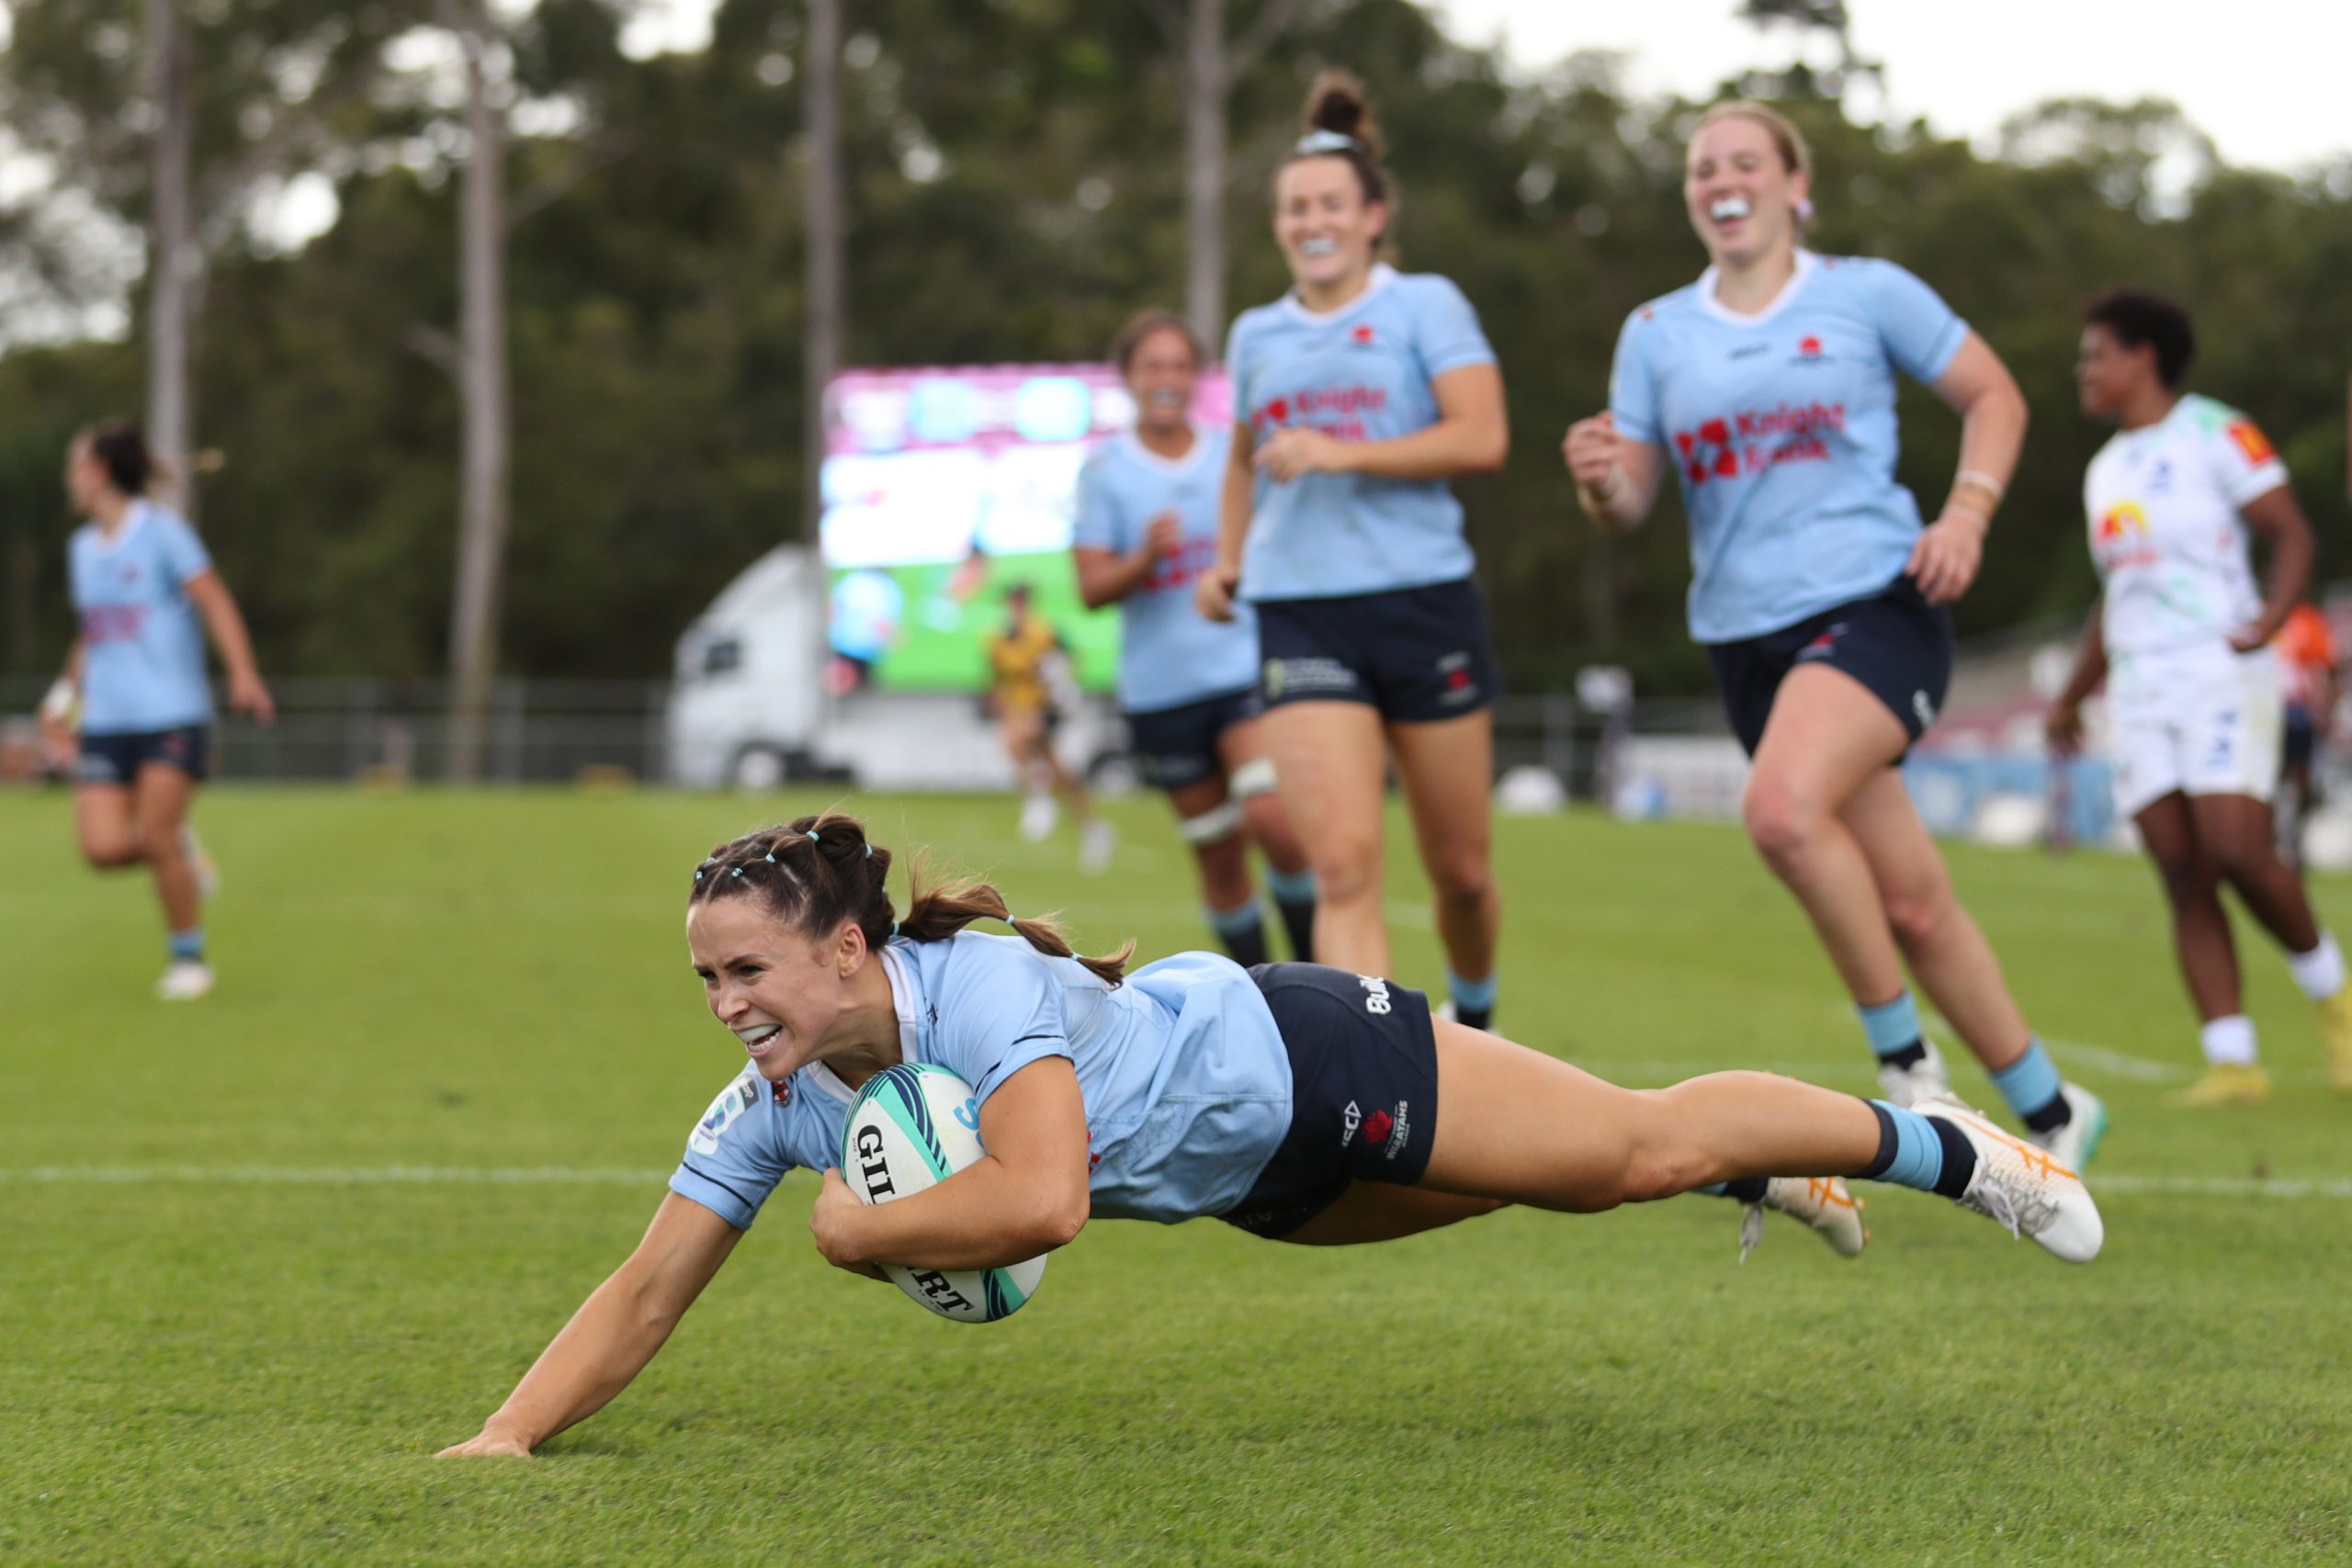 Desiree Miller of the Waratahs scores her third try during the Super Rugby Women's grand final match.